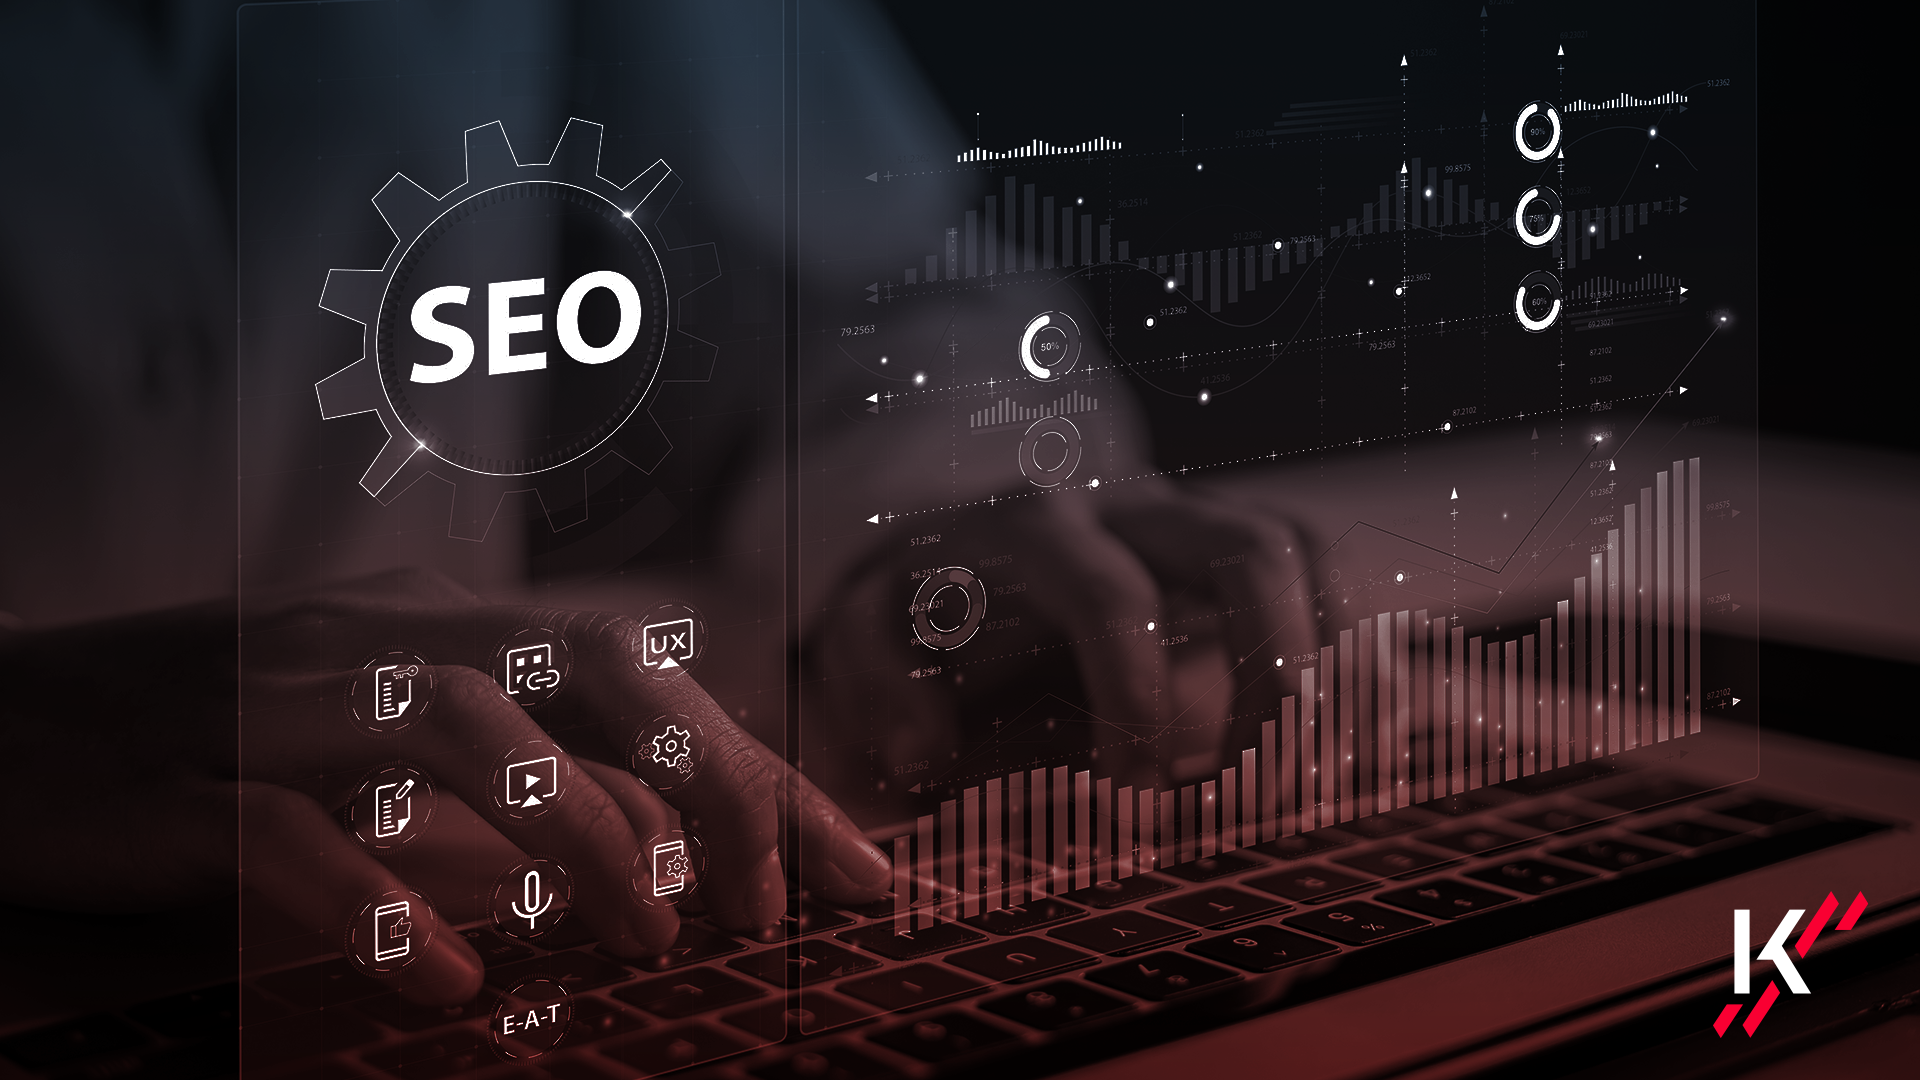 Seven SEO rules to create high-performing content